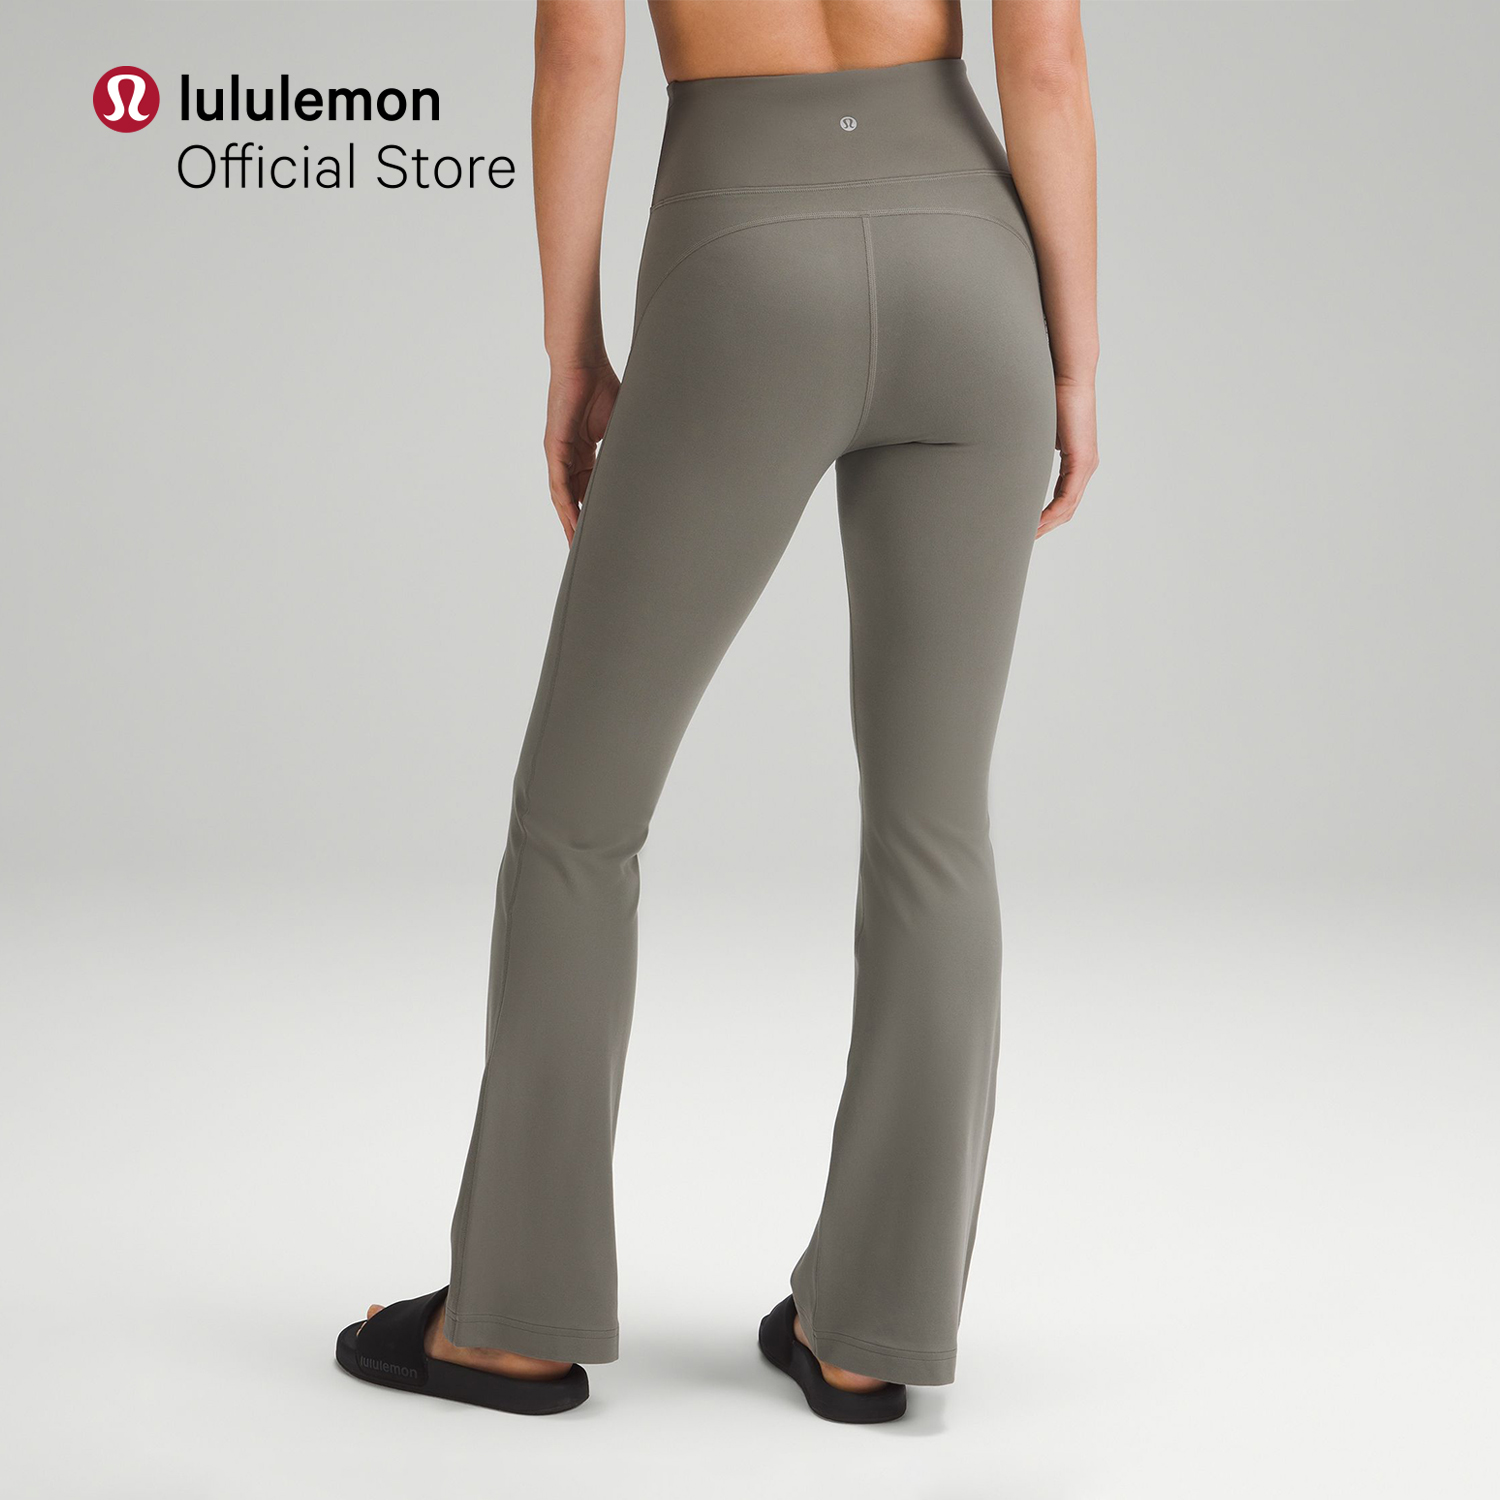 M or Size 6) Lululemon Groove Super-High-Rise Flared Pant Nulu Asia Fit,  Women's Fashion, Activewear on Carousell